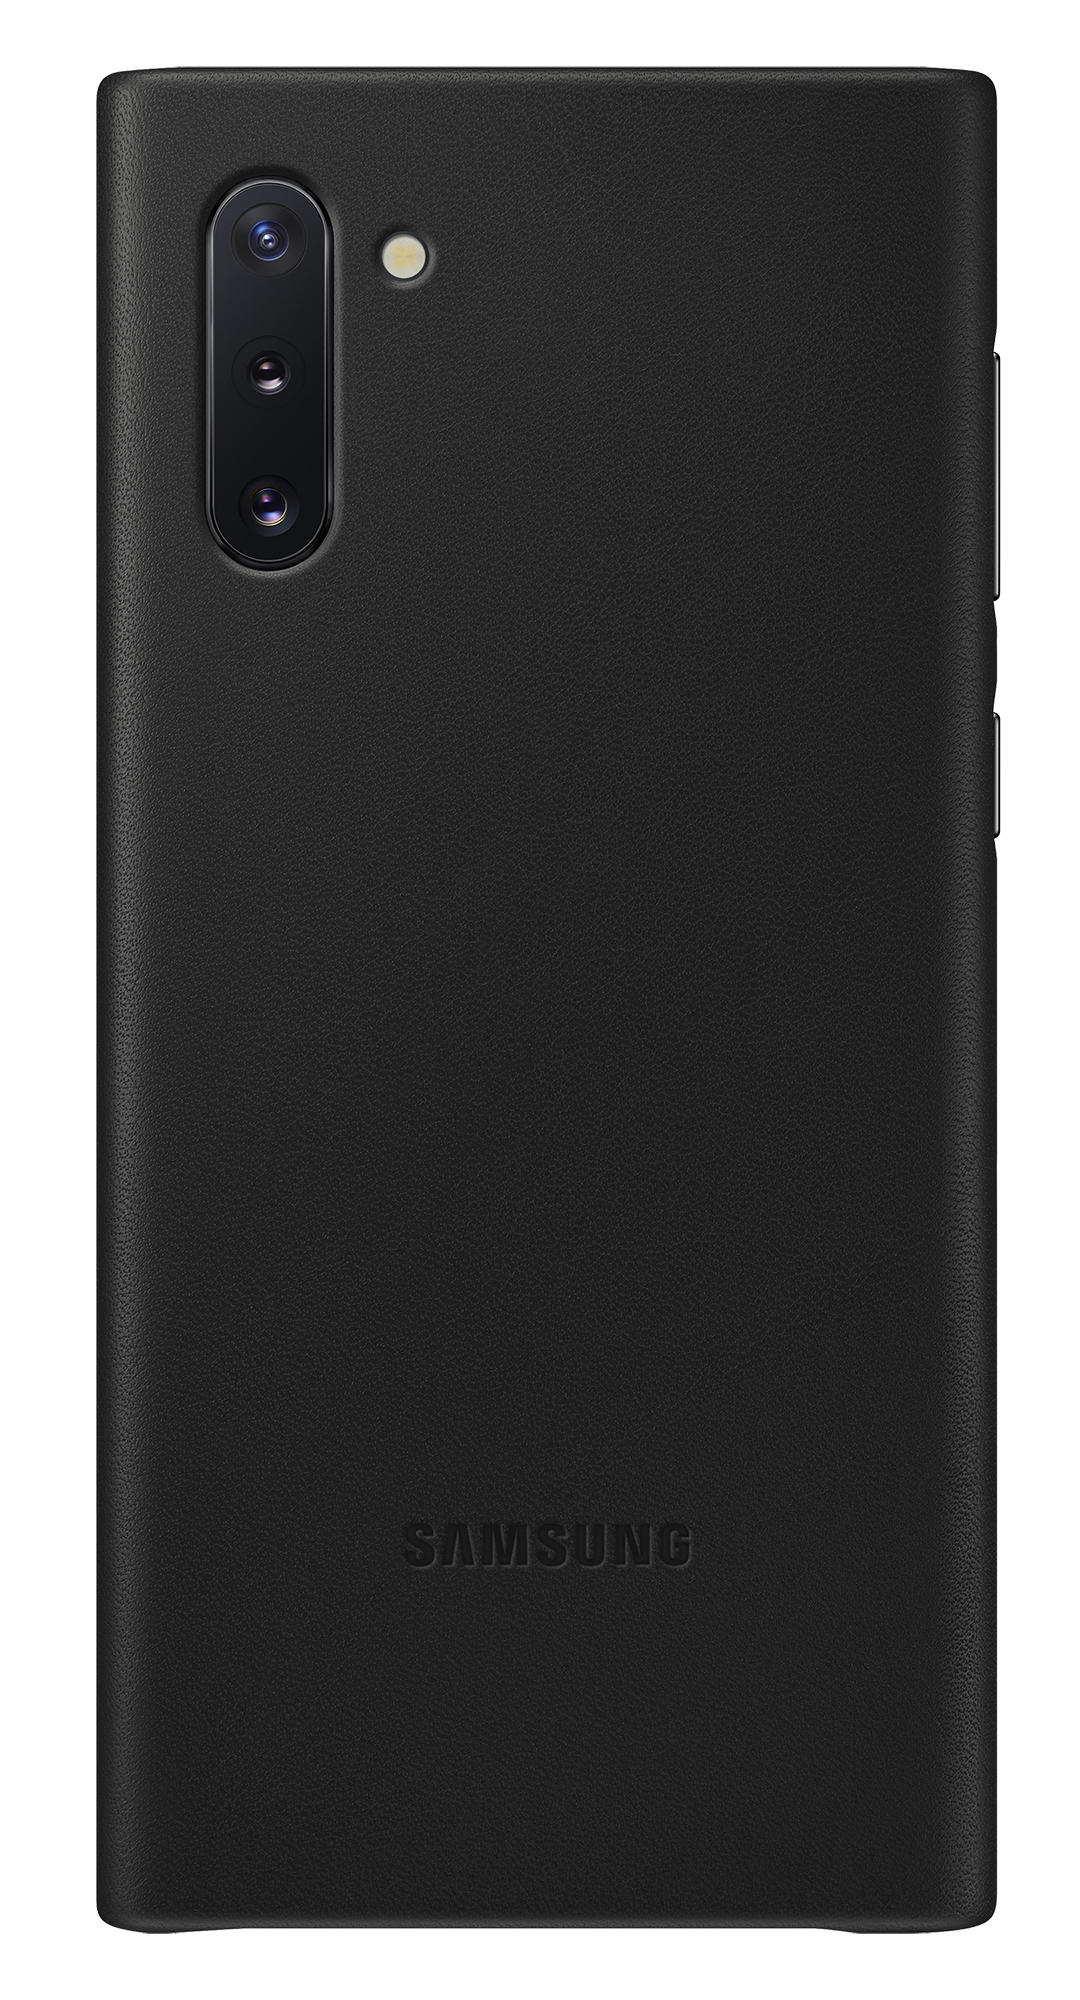 Samsung Leather Cover Black for Galaxy Note 10